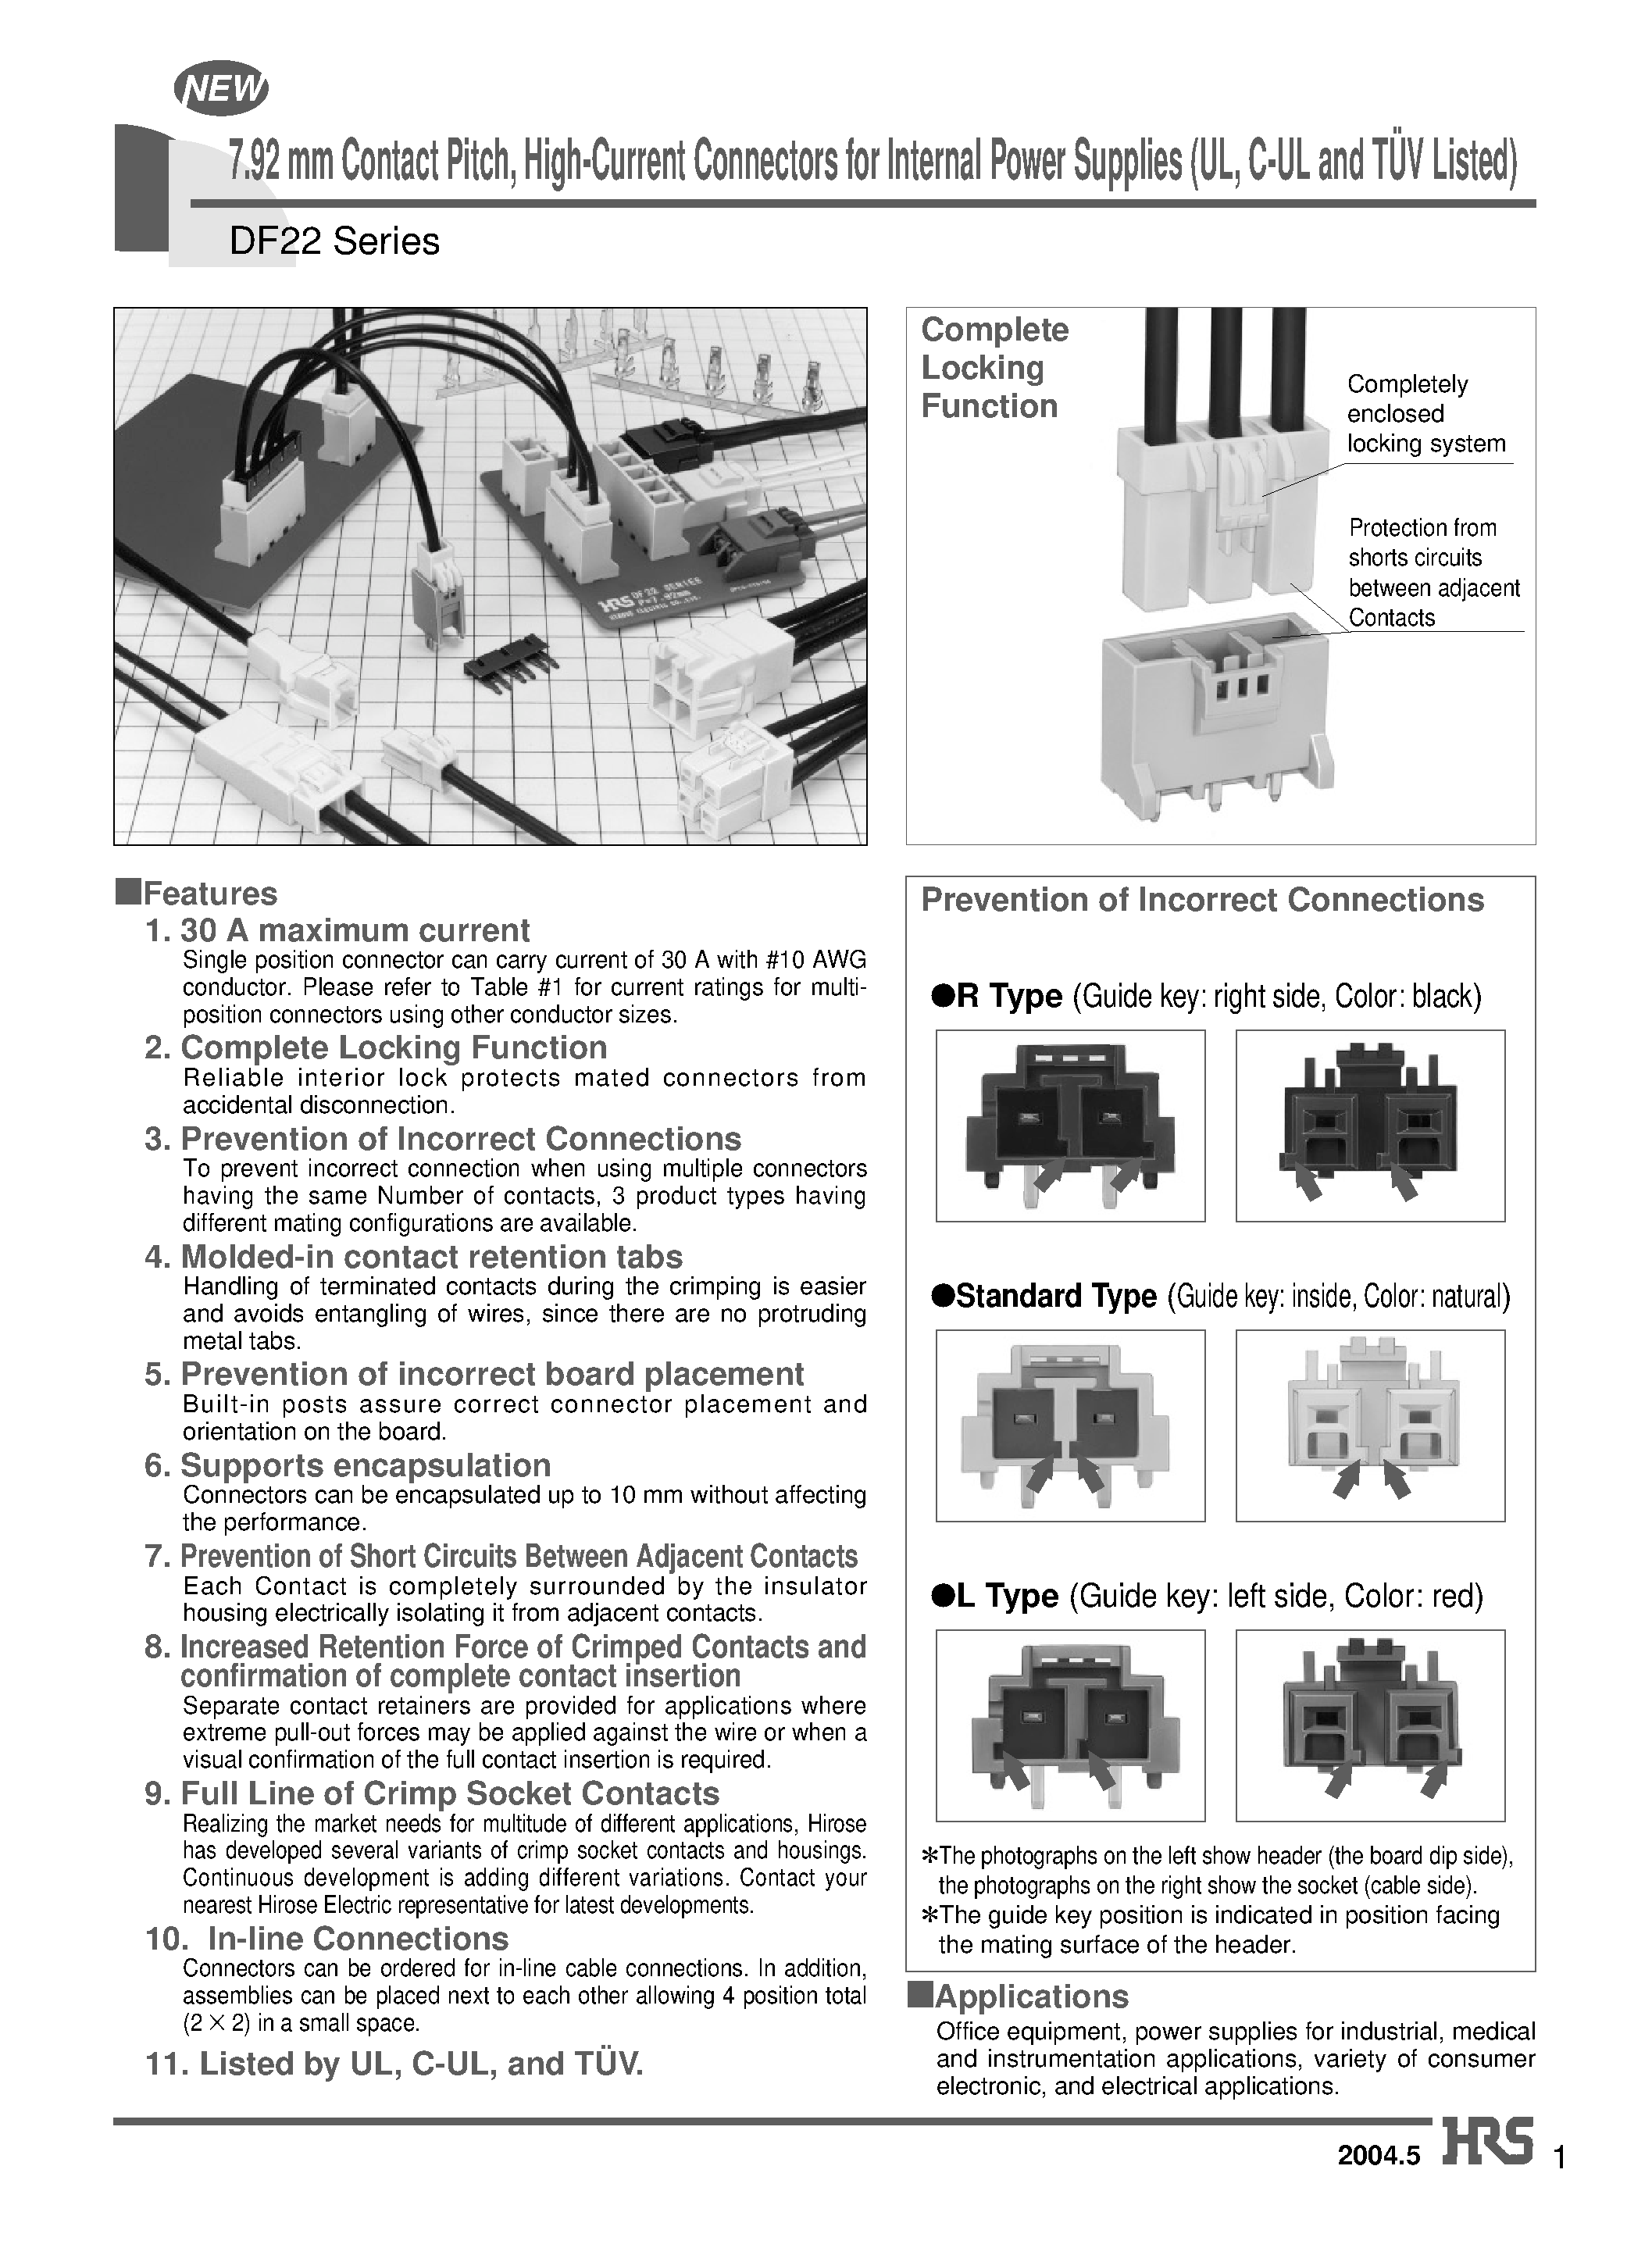 Datasheet DF22A-1S-7.92C - 7.92 mm Contact Pitch/ High-Current Connectors for Internal Power Supplies (UL/ C-UL and TUV Listed) page 1